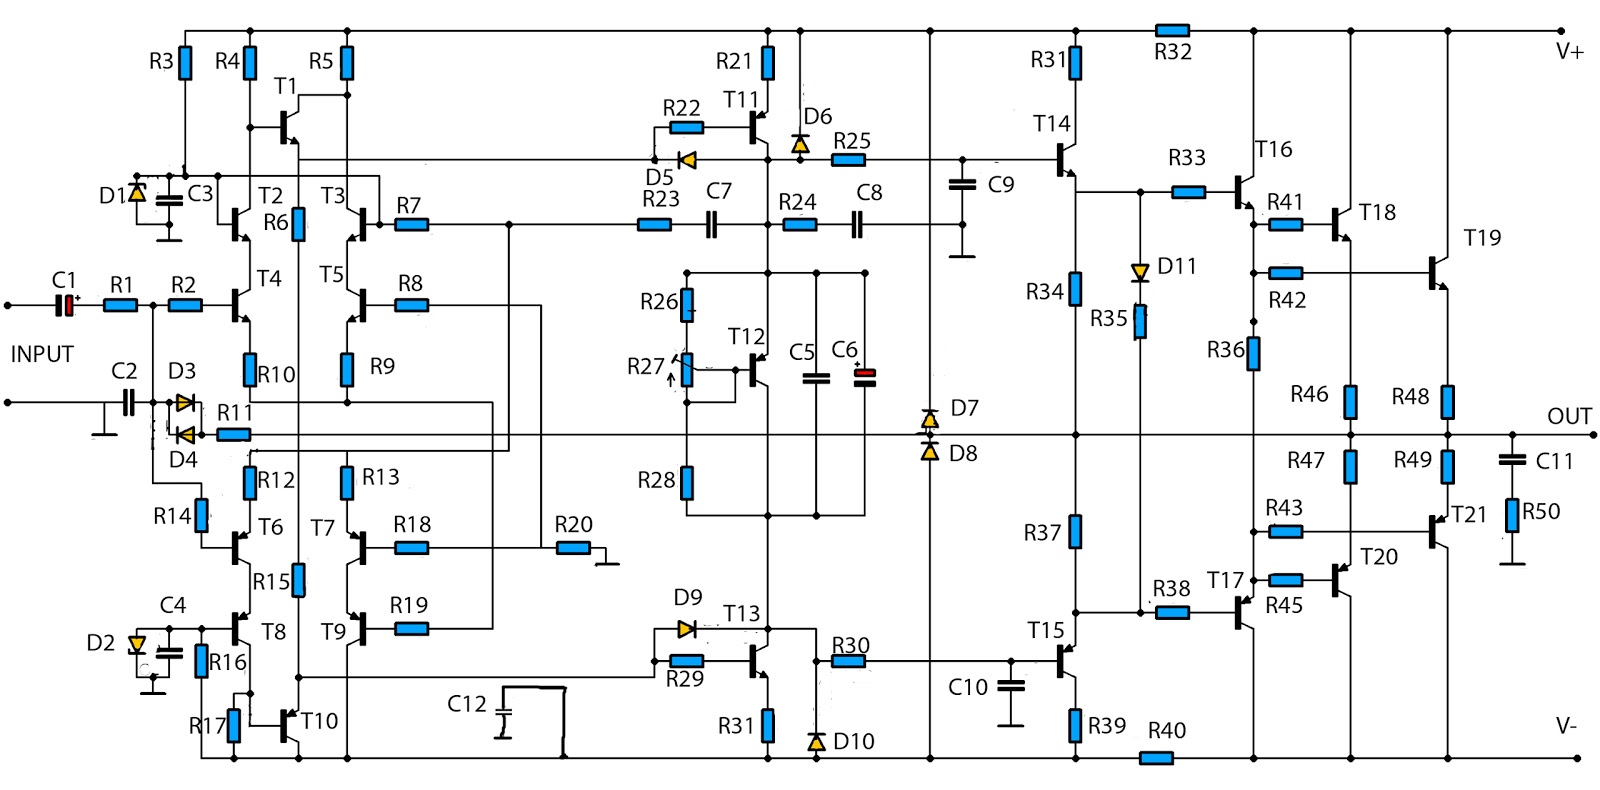 Best Quality Power Amplifiers Circuit - 2800w High Power Audio Amplifier Circuit Diagram - Best Quality Power Amplifiers Circuit